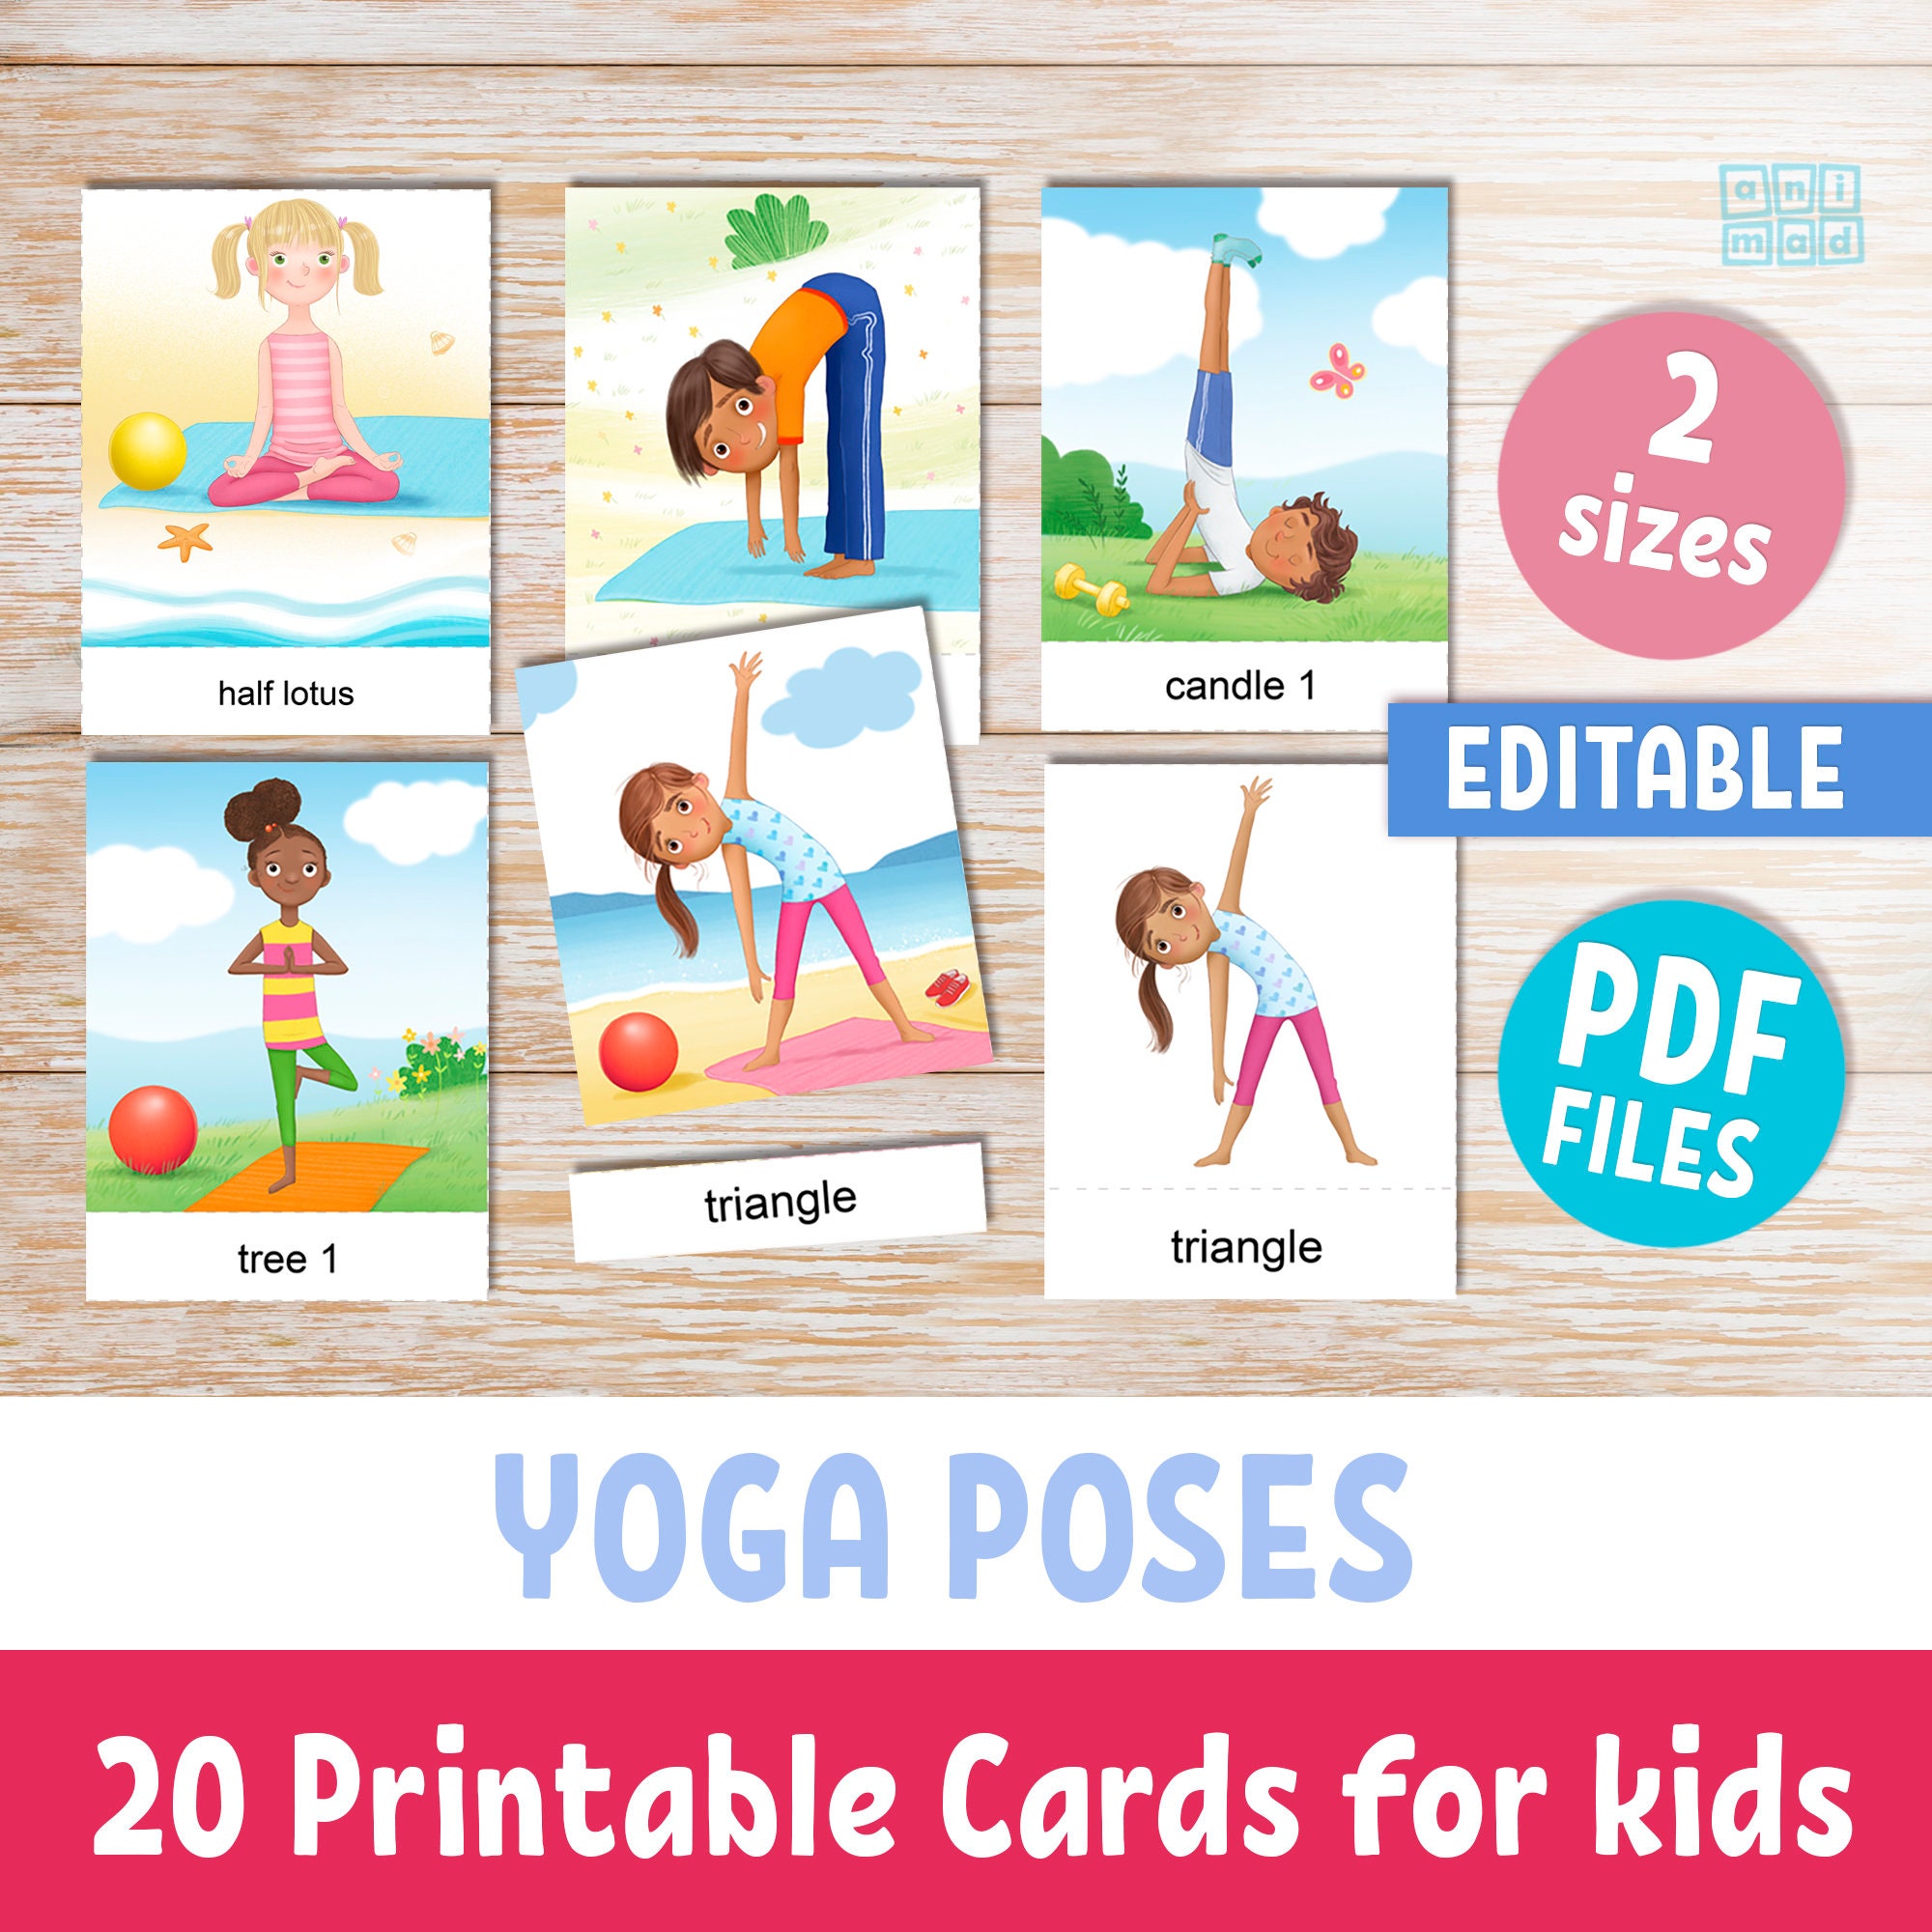 Yoga Cards With Yoga Poses For kids | Made By Teachers